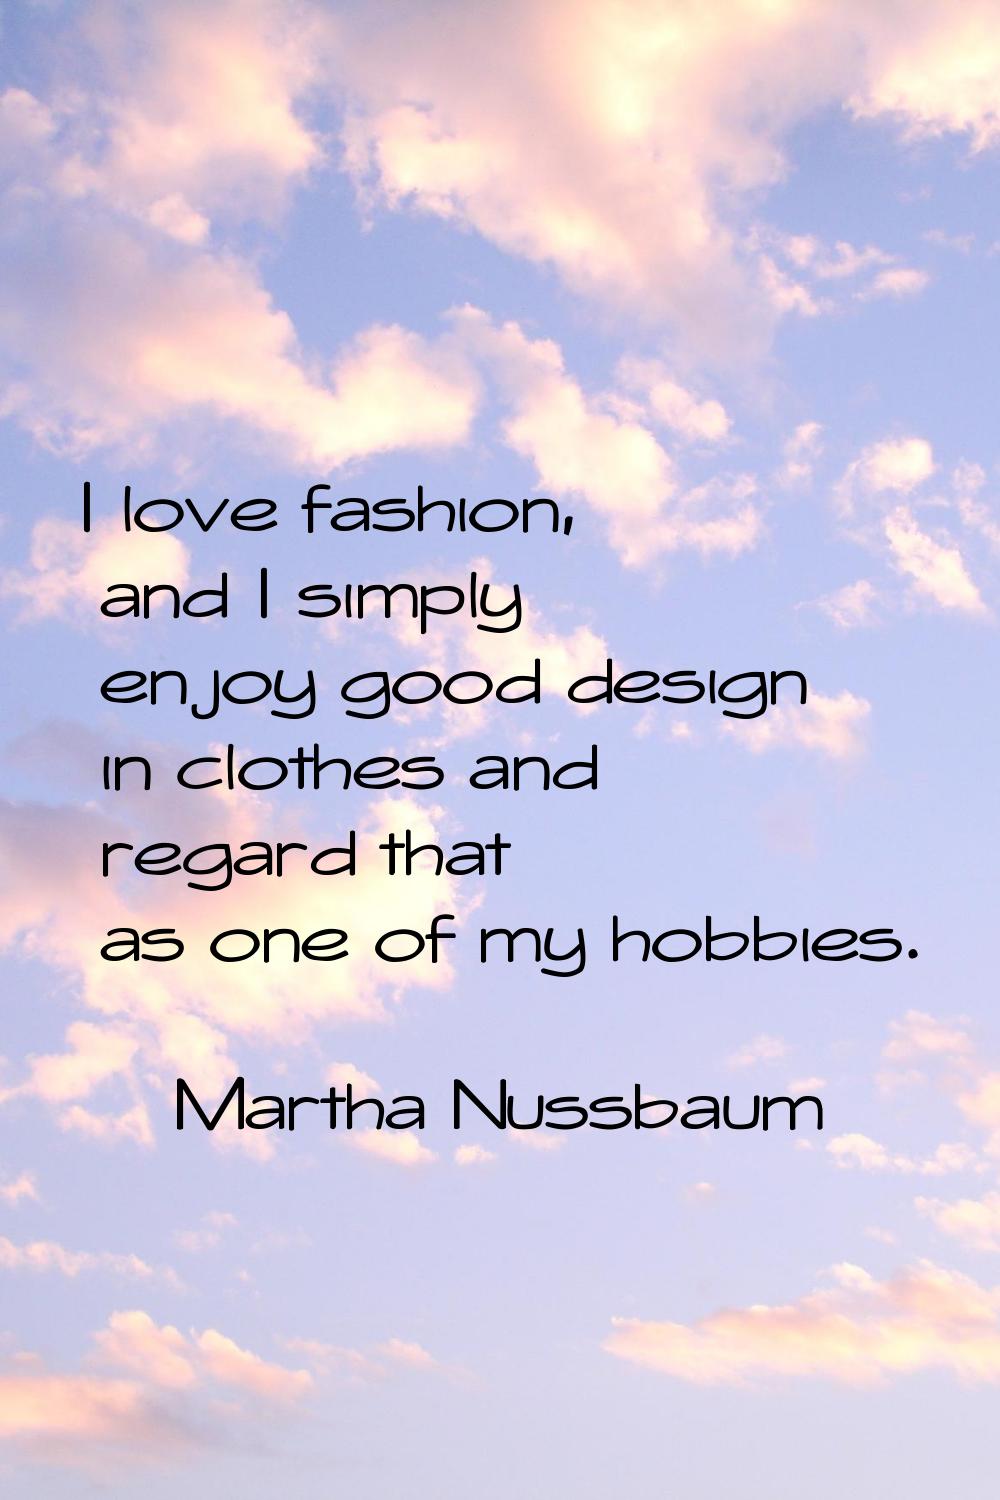 I love fashion, and I simply enjoy good design in clothes and regard that as one of my hobbies.